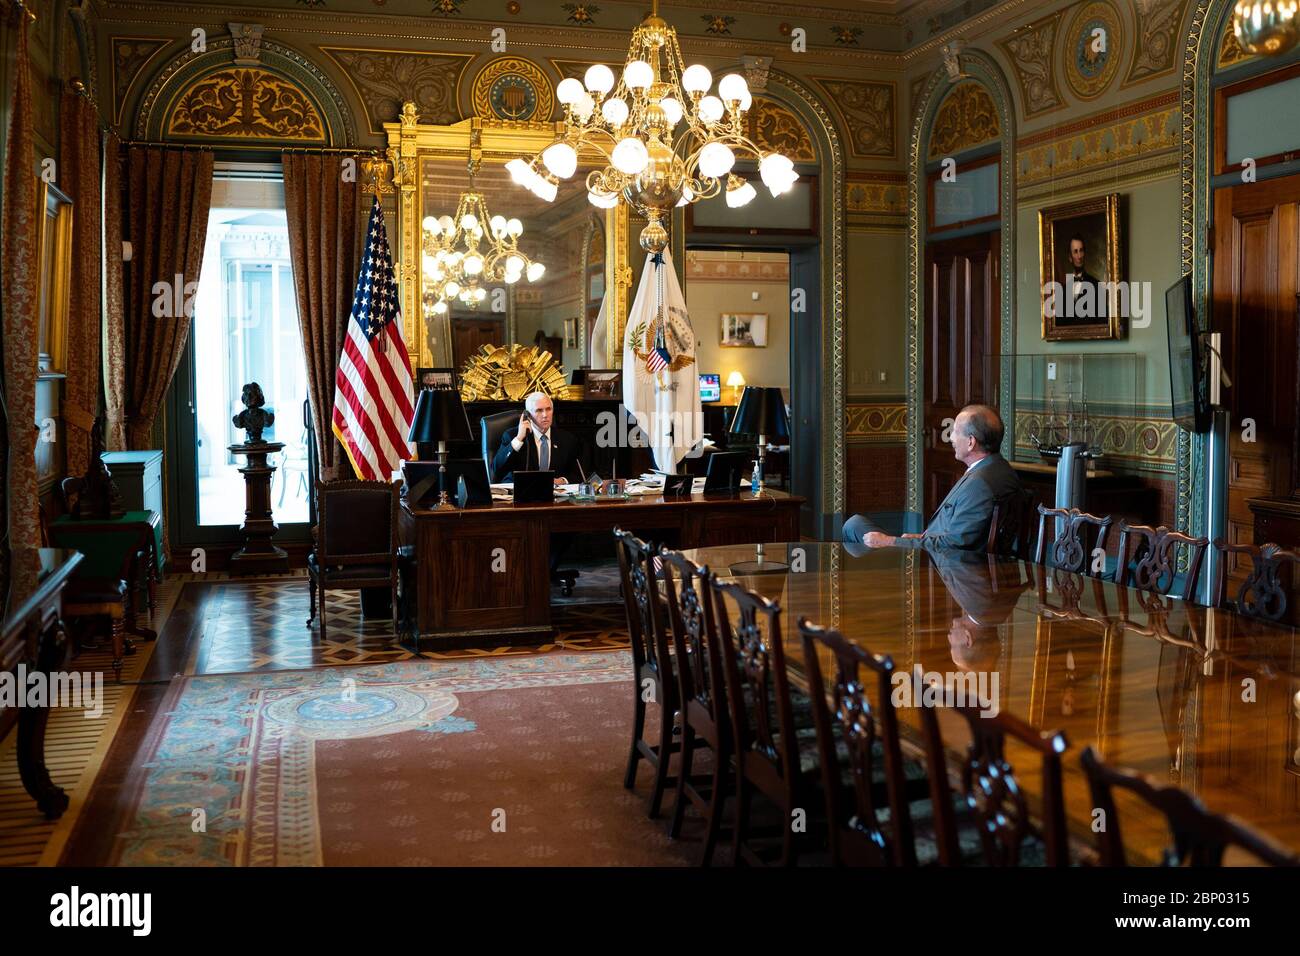 Ceremonial Office High Resolution Stock Photography And Images Alamy